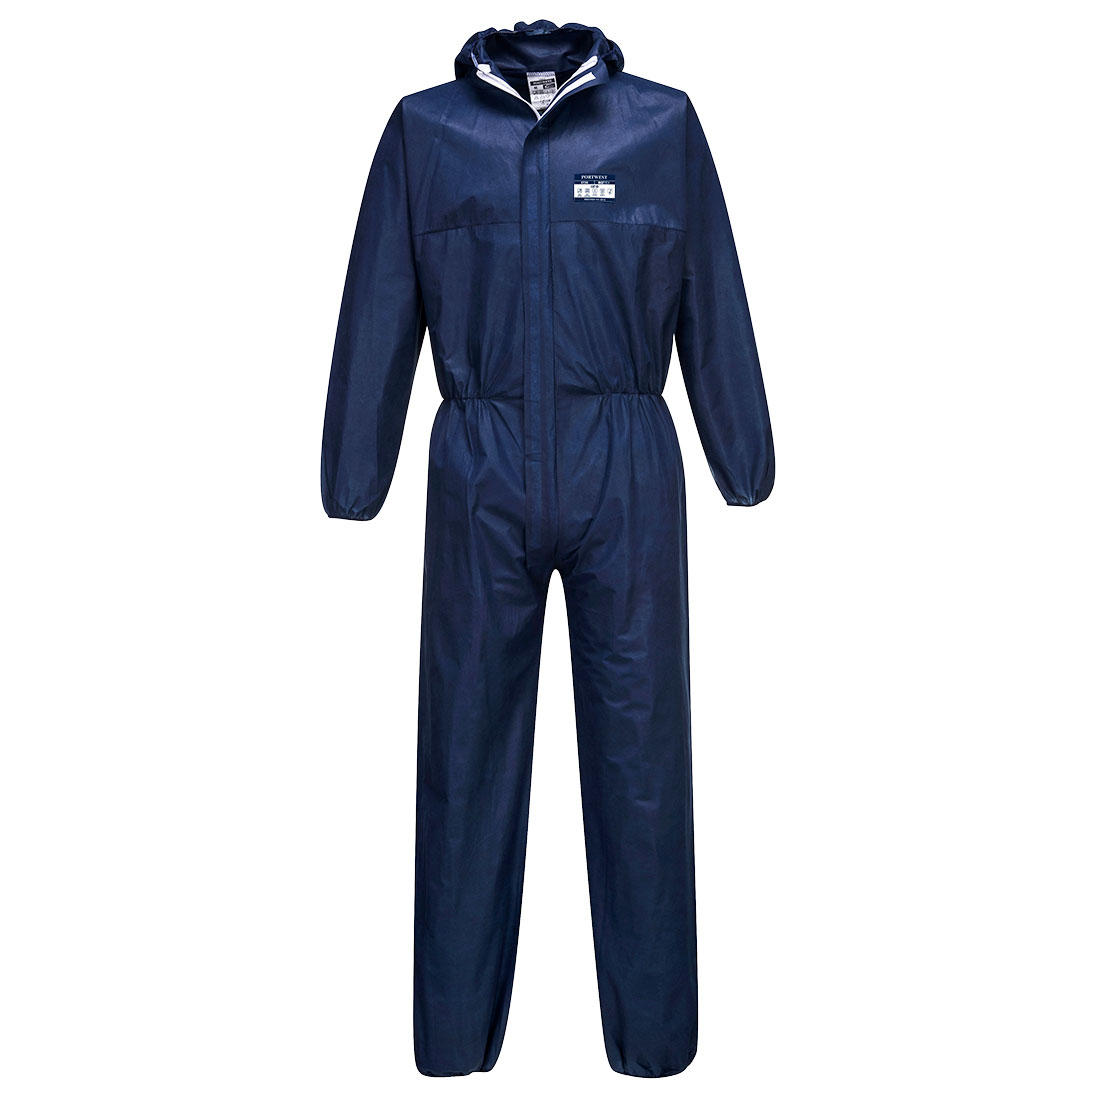 BizTex SMS Coverall Type 5/6